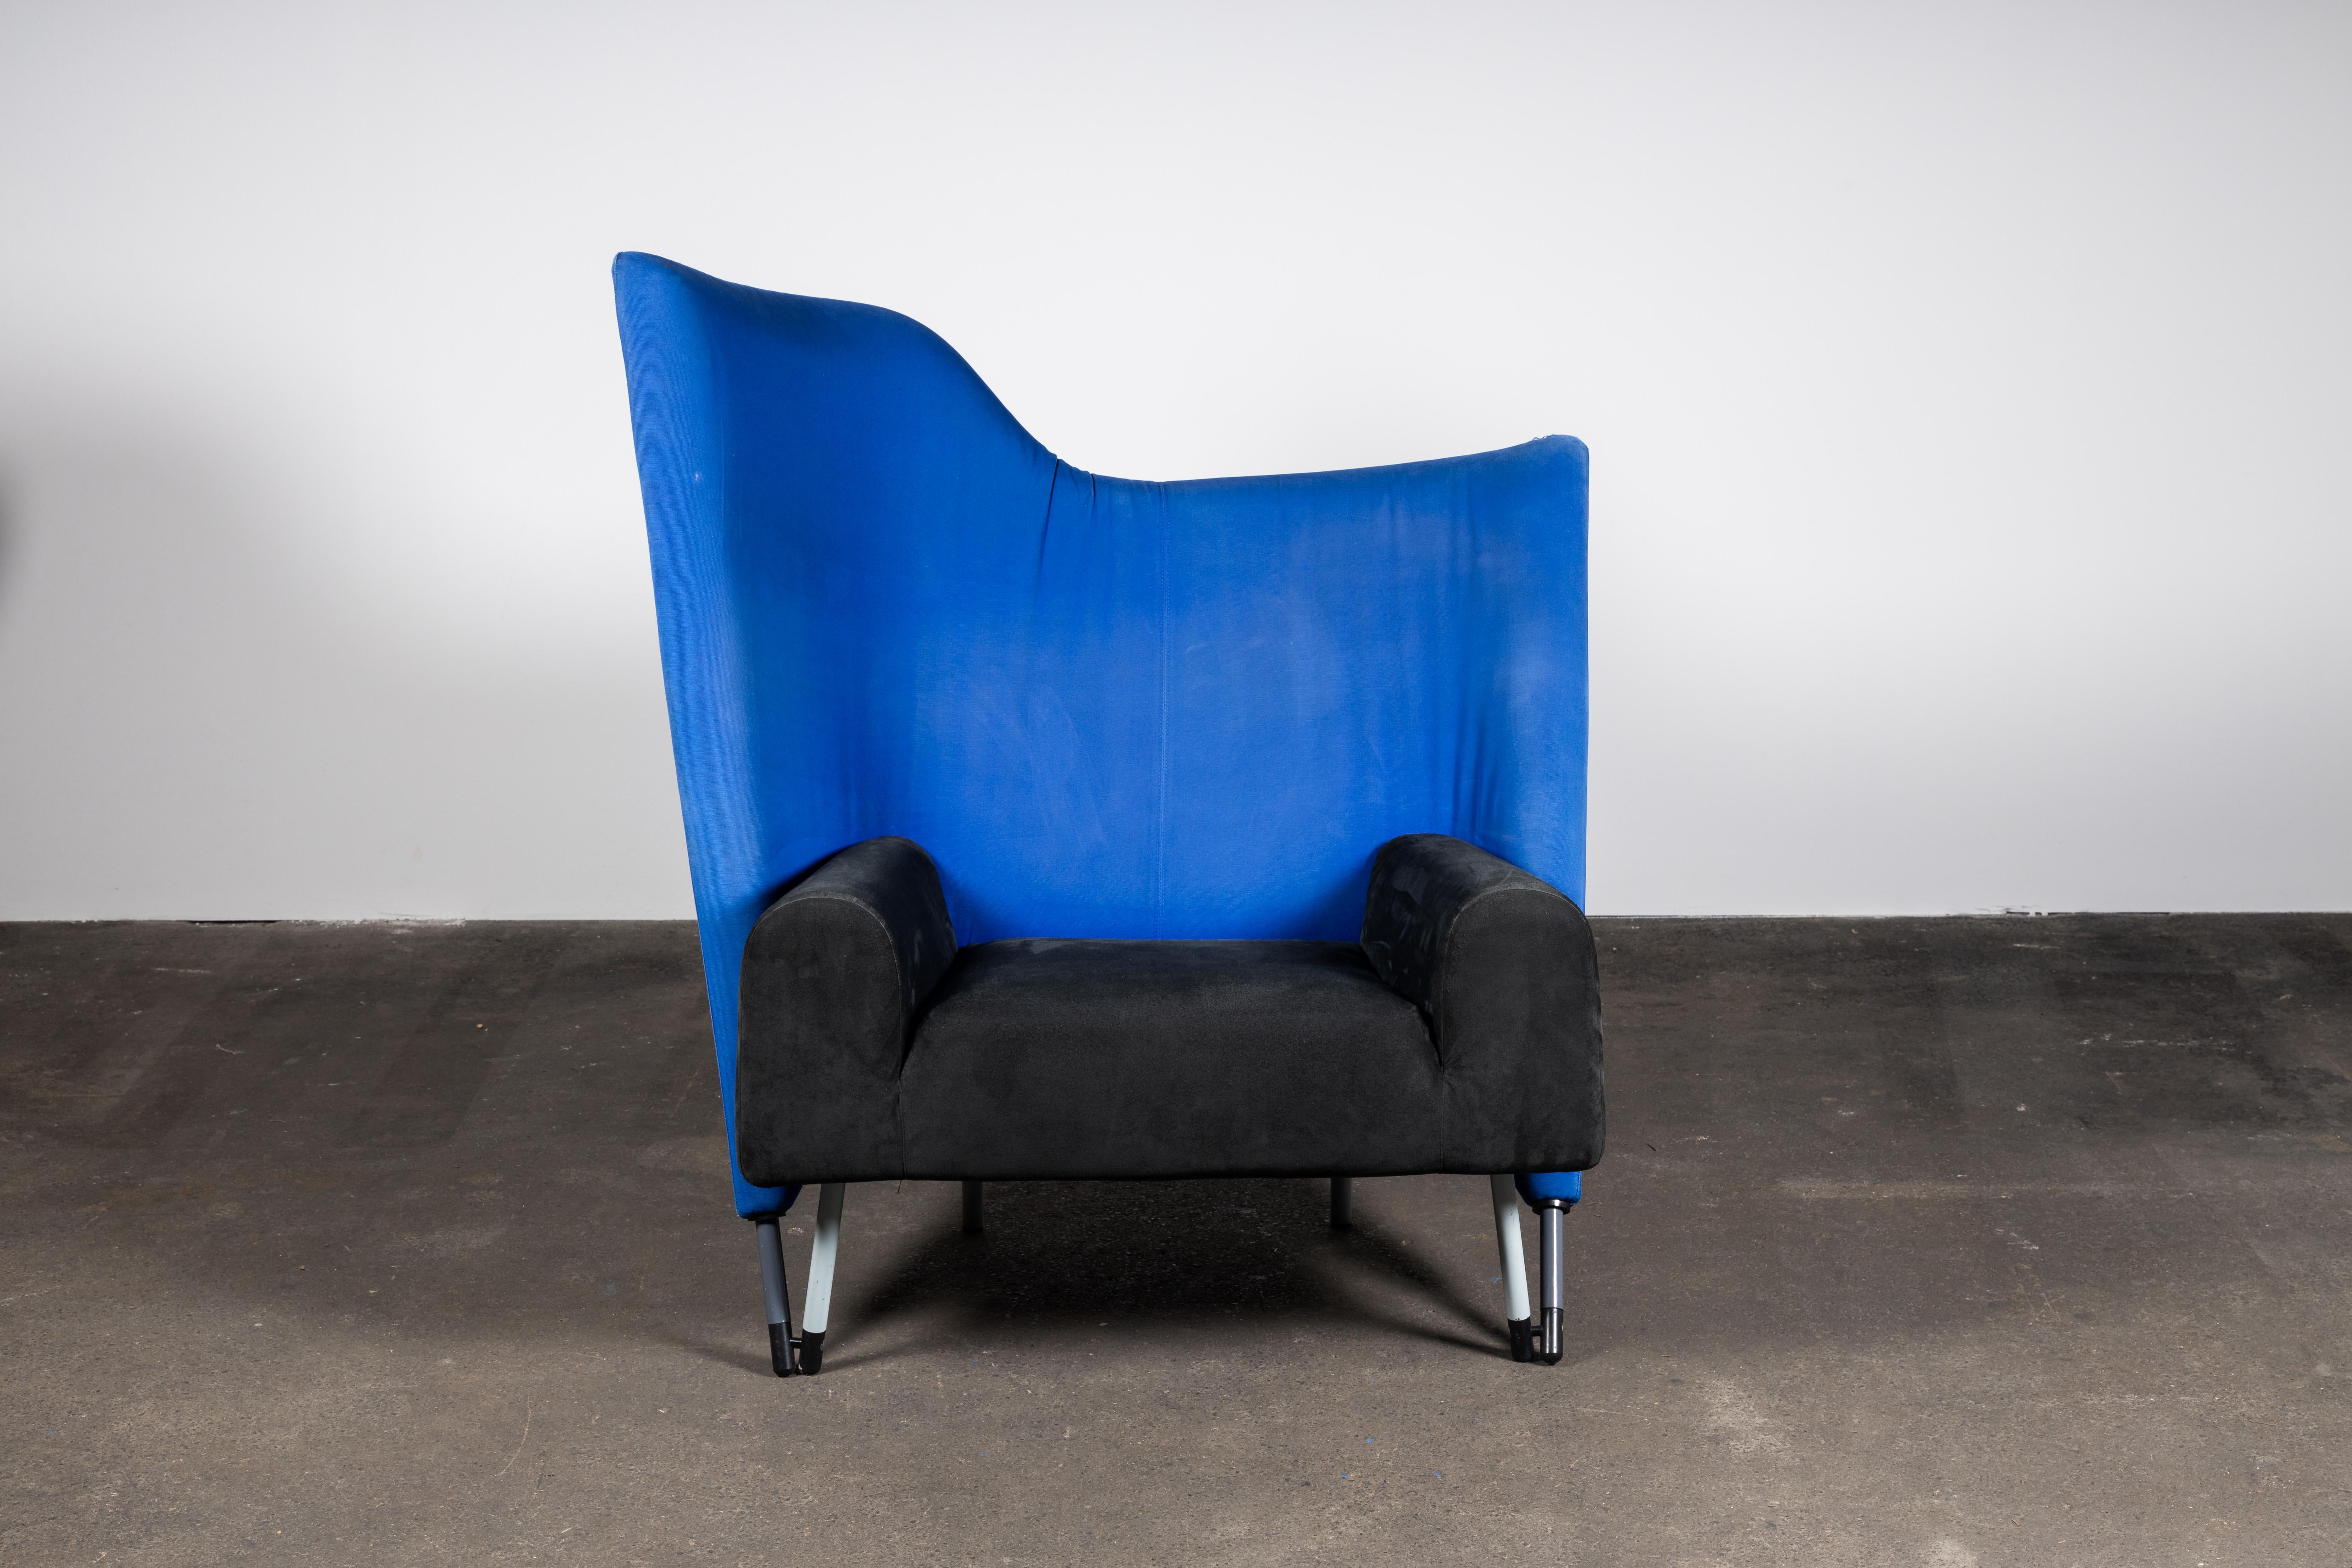 Large, loud (screaming!) and proudly maximalist. Pair of opposing asymmetrical organic form armchairs made by Cassina. Postmodern statement chairs designed by Italian architect Paolo Deganello. Fortune favors the bold!

The bench and arms of the